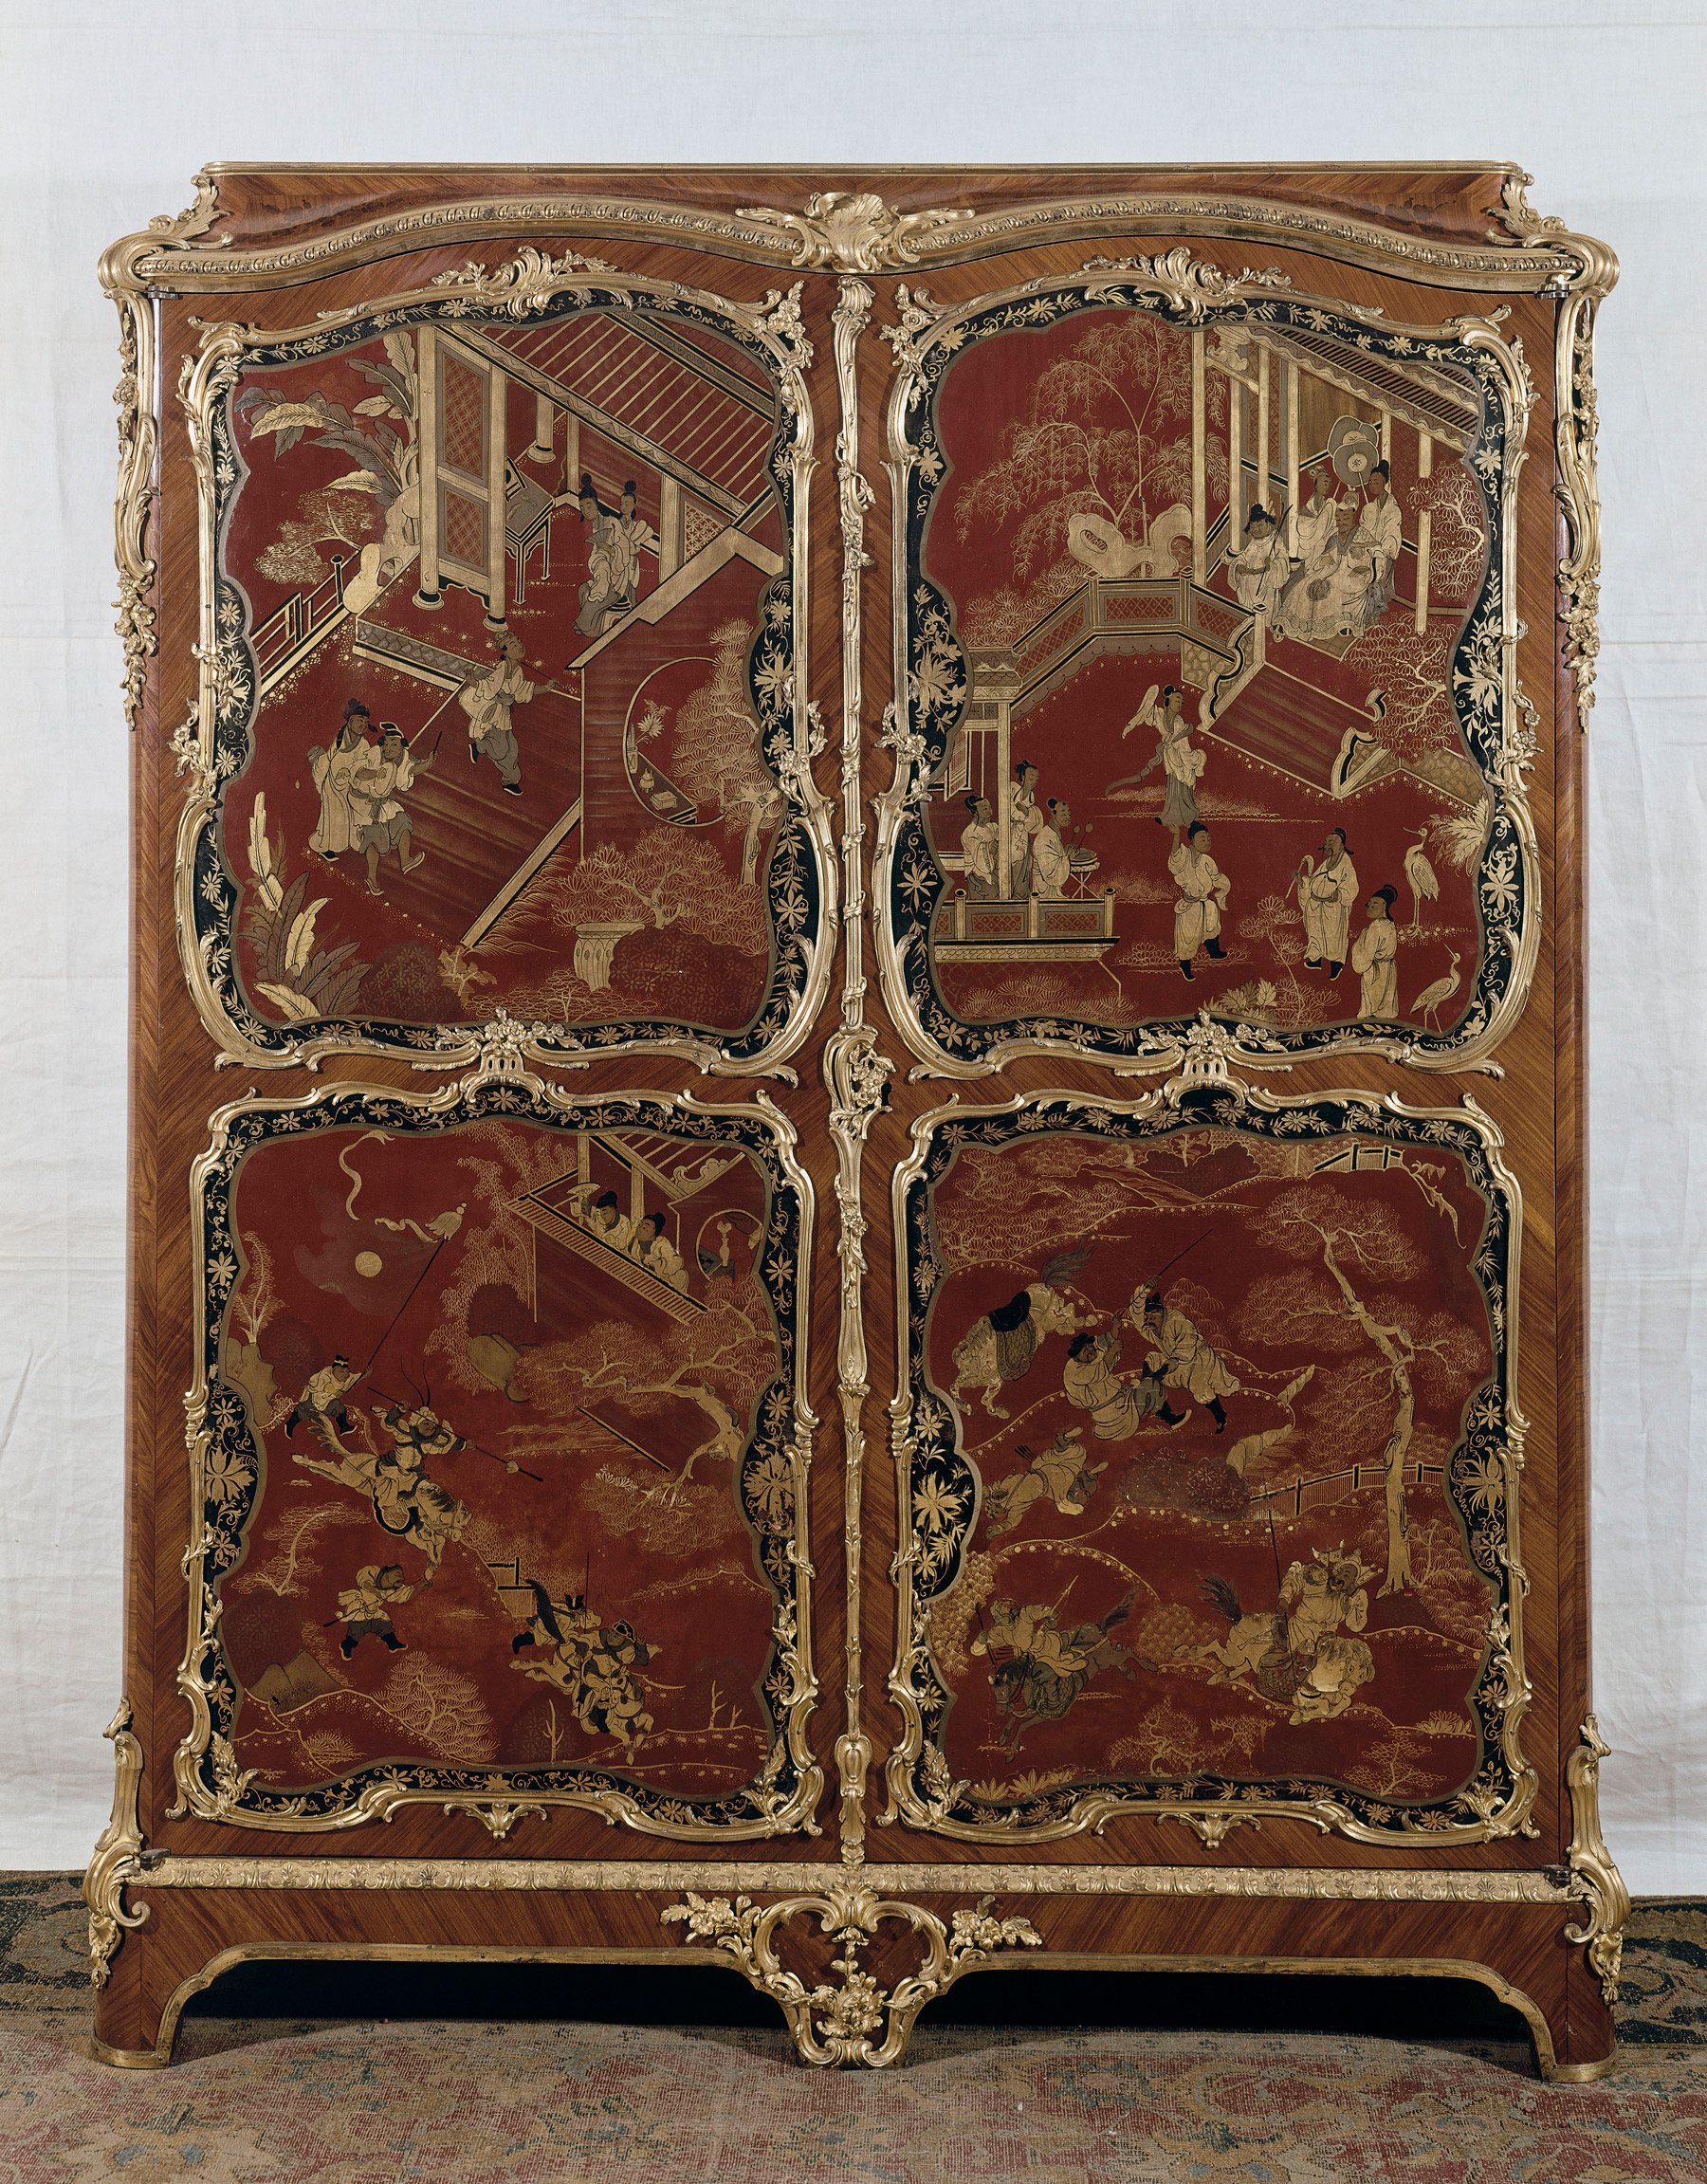 “a large armoire with four red lacquer panels featuring Chinese figures and framed with floral gilt bronze molding”